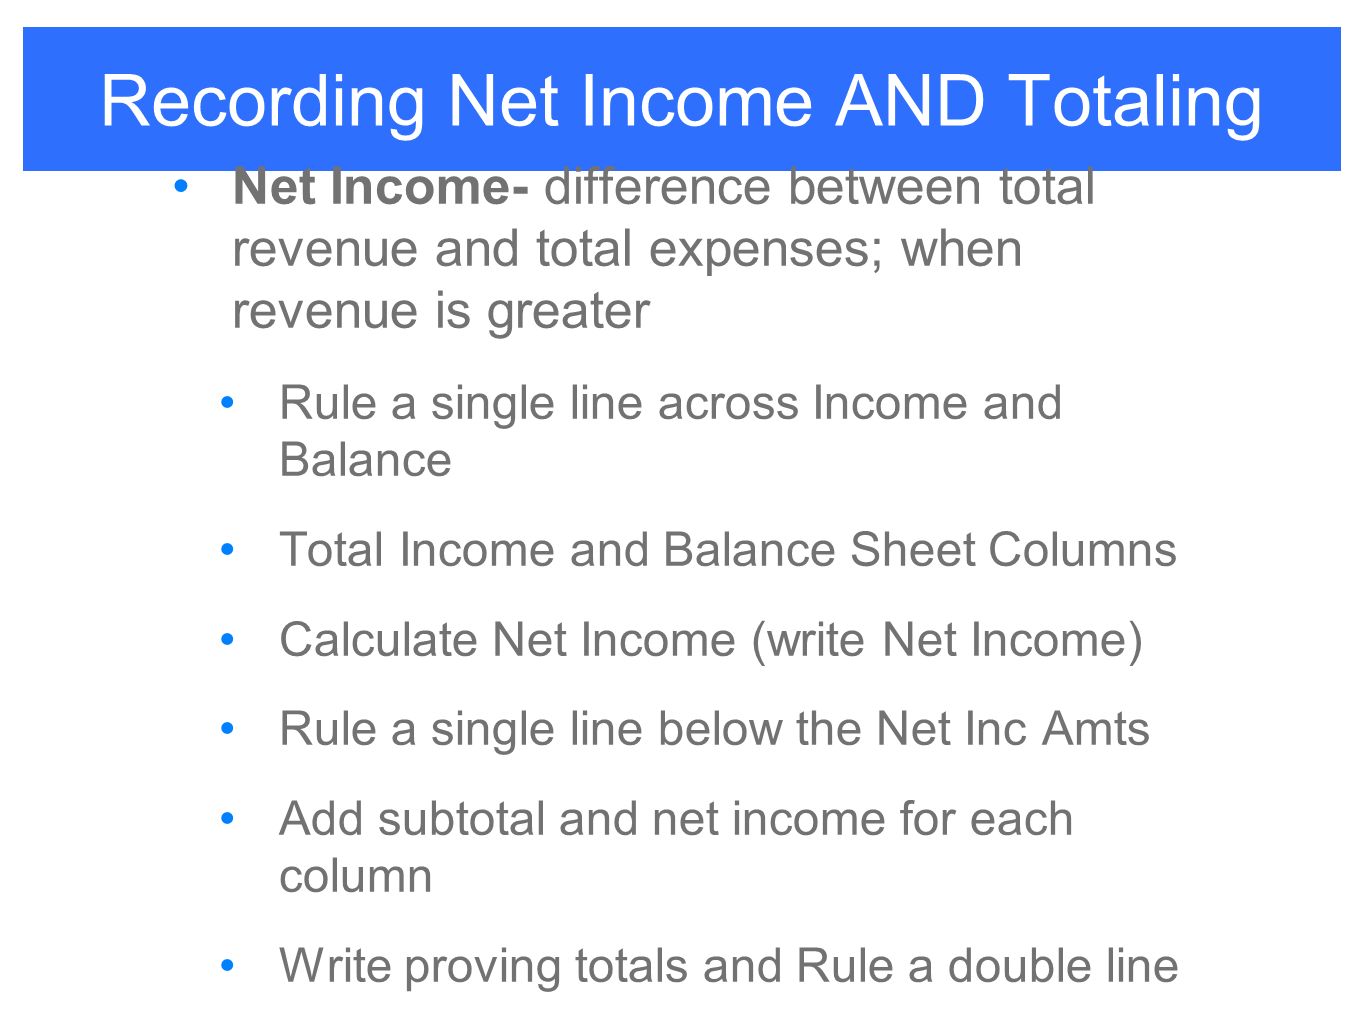 Recording Net Income AND Totaling